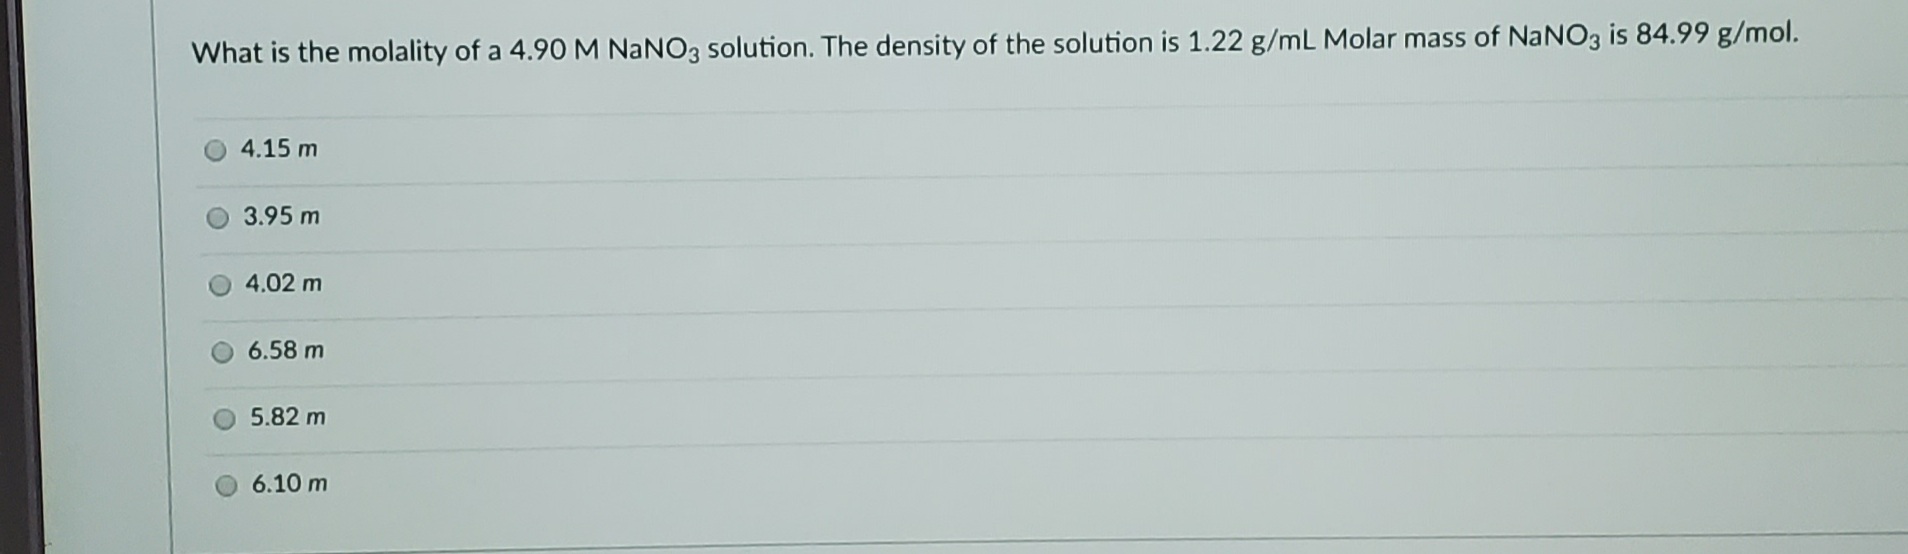 What is the molality of a 4.90M NANO3 solution. The density of the solution is 1.22 g/mL Molar mass of NANO3 is 84.99 g/mol.
4.15 m
3.95 m
4.02 m
6.58 m
5.82 m
6.10 m
